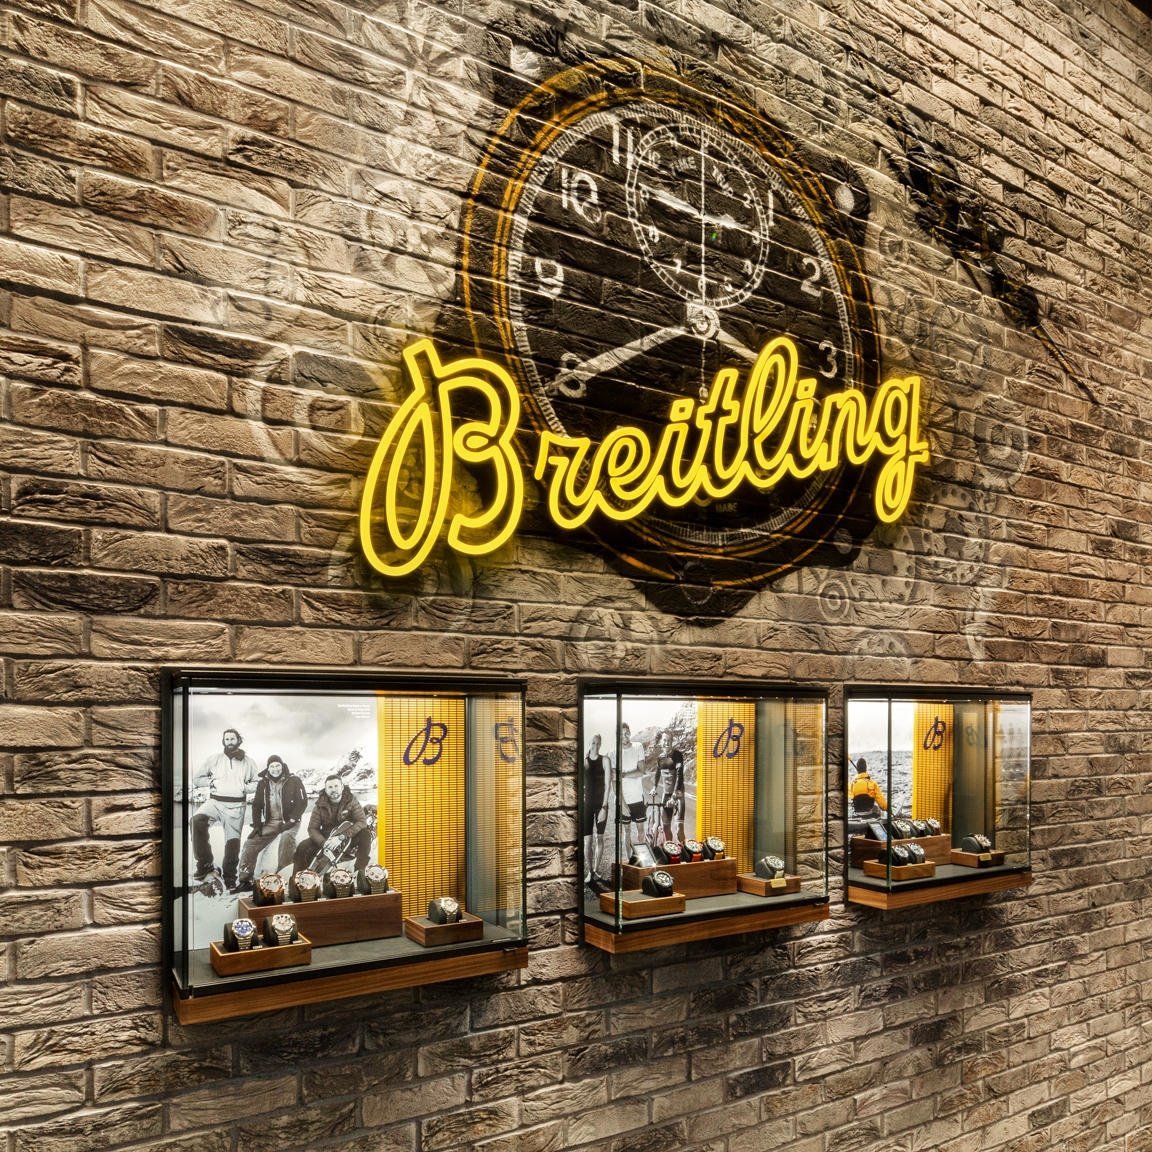 Breitling Boutique Cardiff